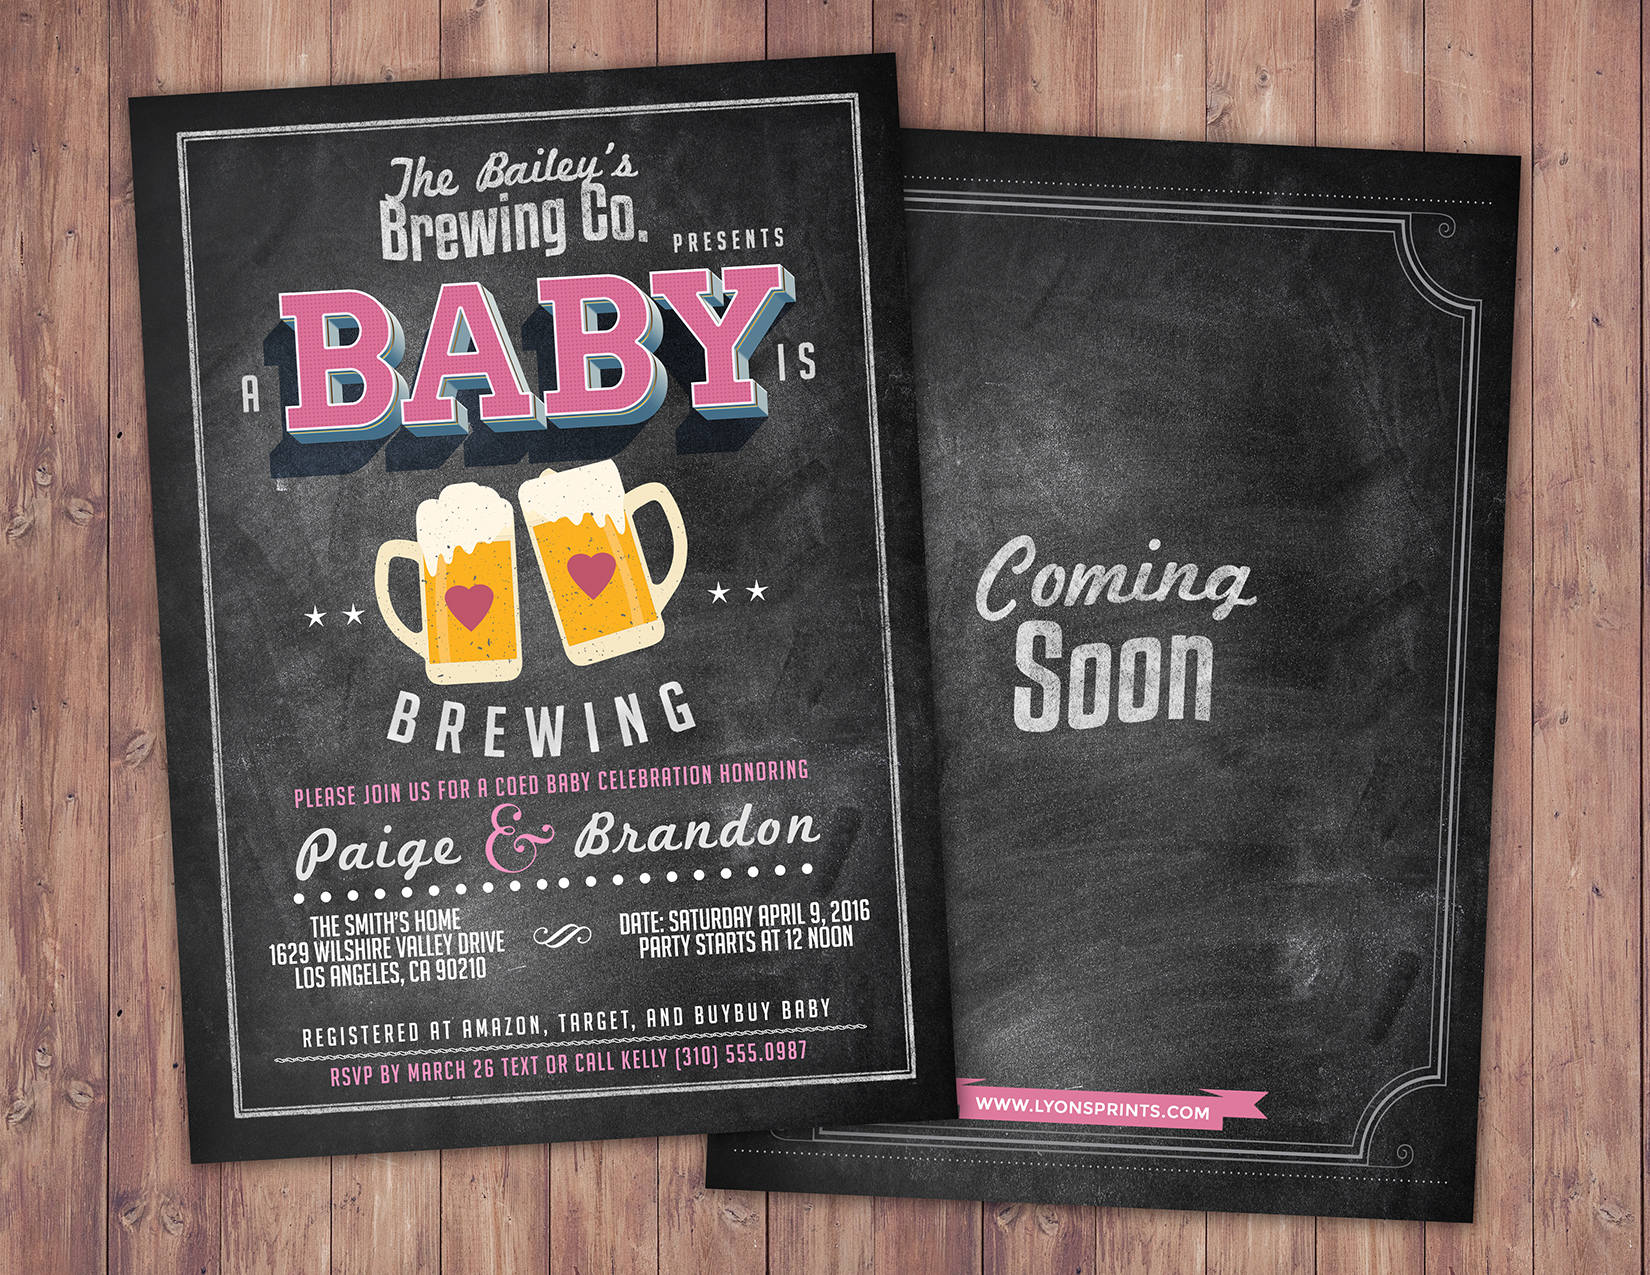 Full Size of Baby Shower:precious Coed Baby Shower Picture Designs Coed Baby Shower Invitation Beer Baby Shower Invitation Couples Coed Baby Shower Invitation Beer Baby Shower Invitation Couples Baby Shower Baby Shower Boy Baby Shower Couples Shower